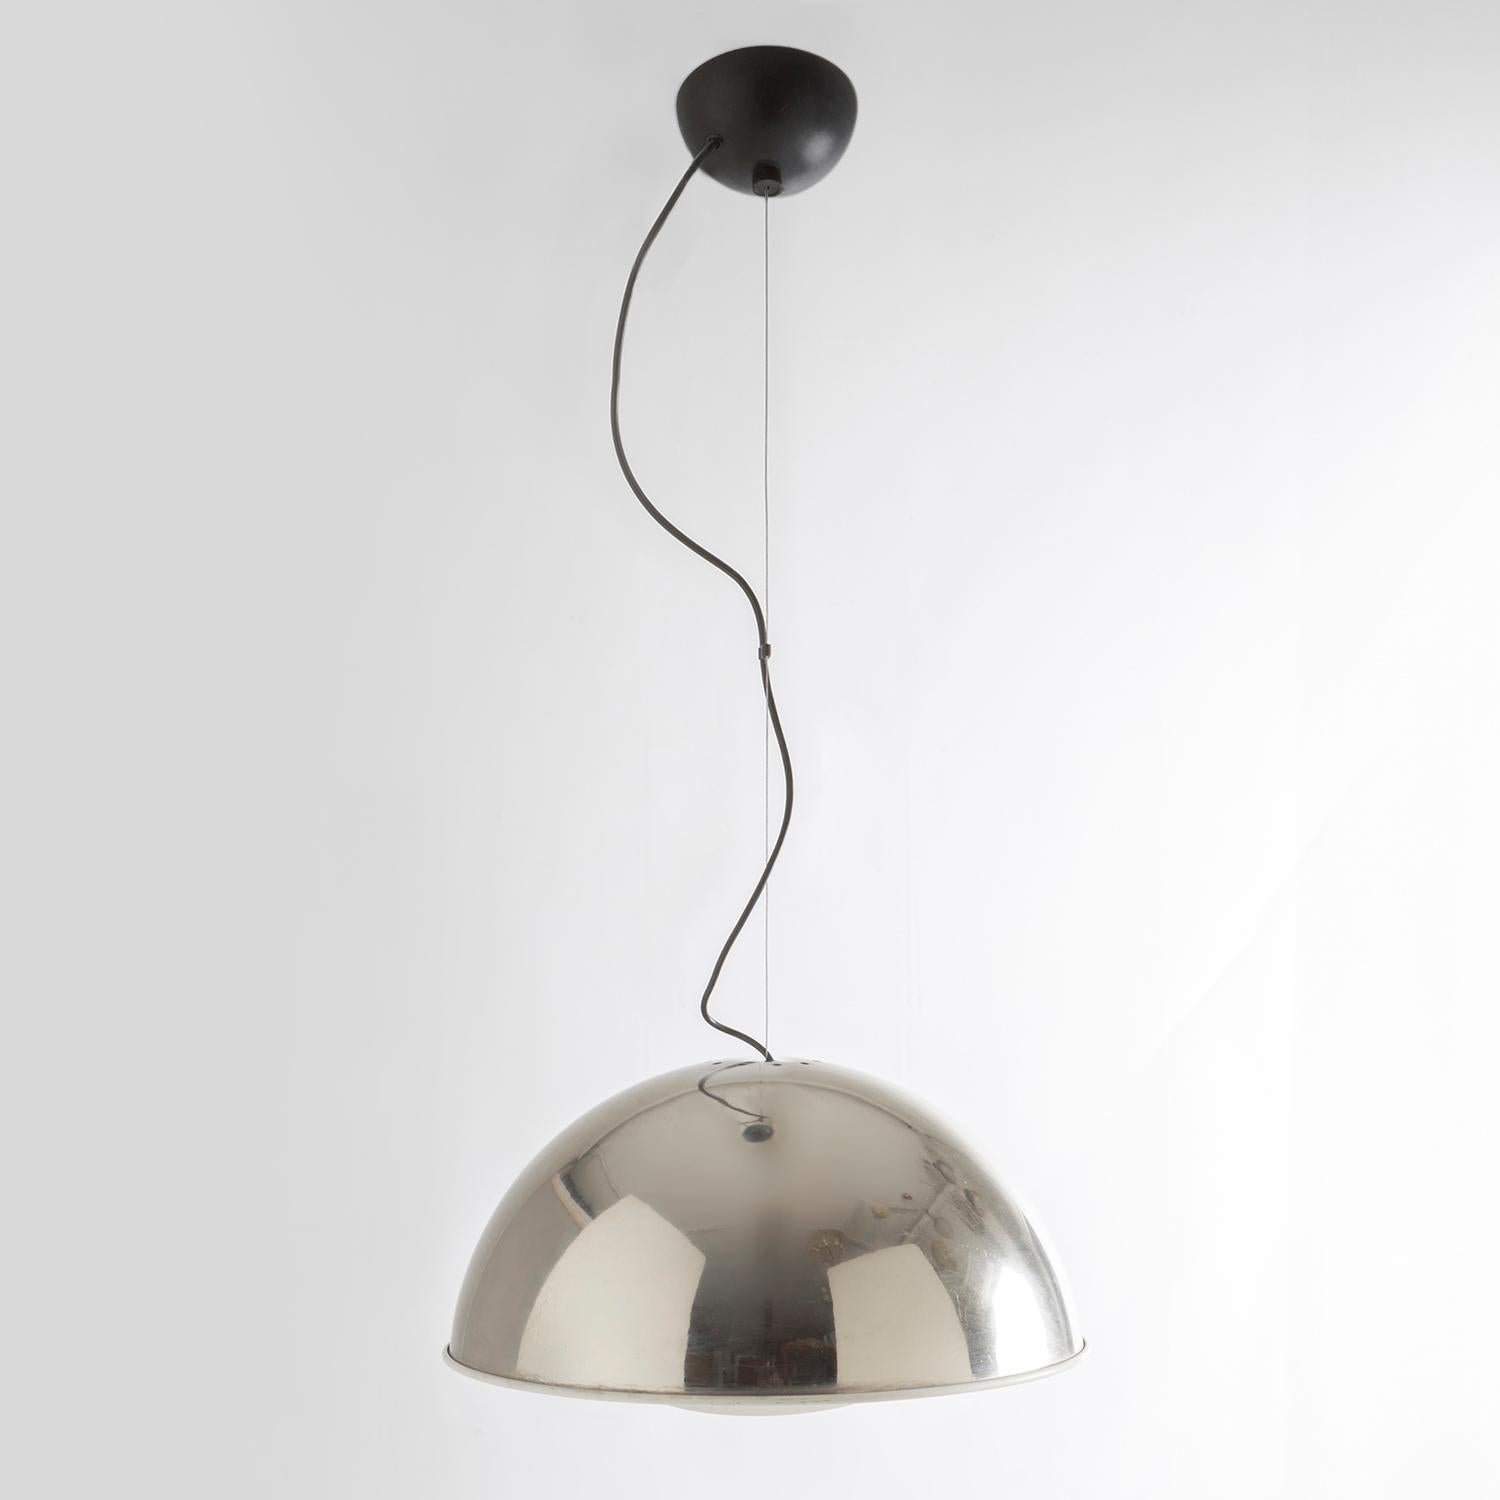 Rare and unusual pendant designed by Max Ingrand for Fontana Arte in the late 1960s, chrome cap and white inner reflector. Etched and frosted diffuser glass. In excellent condition, the height measurement refers to the canopy only, the height from